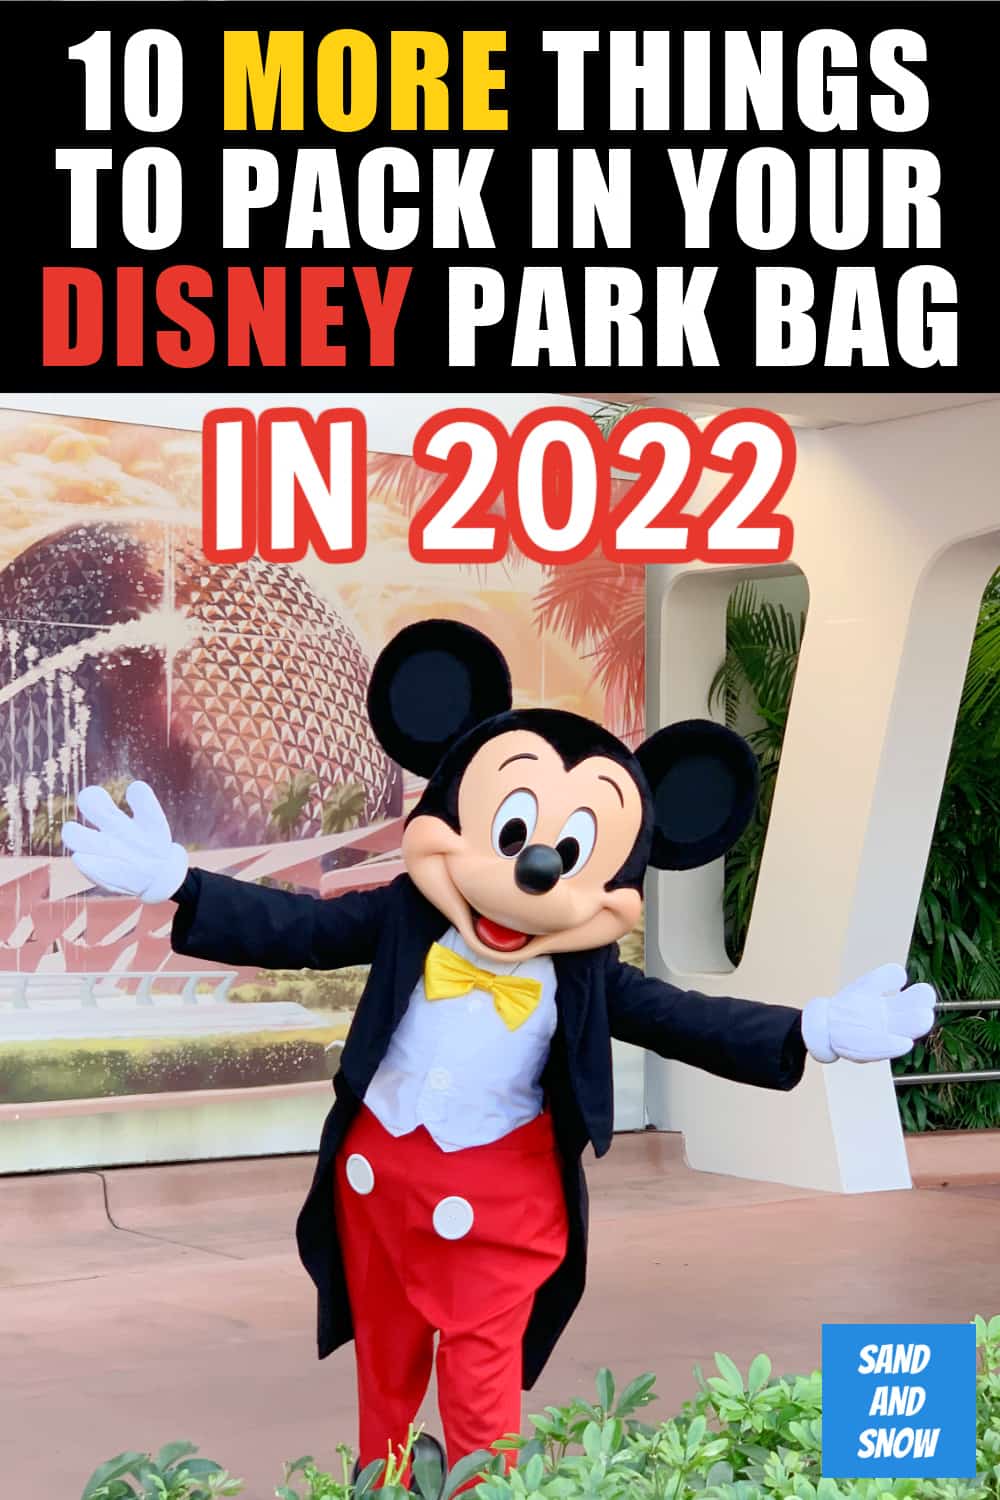 Visiting Walt Disney World in 2022 and want to make sure your go-to bag is filled with all of the essentials? From breath avers to extras, here are 10 things to pack in your Disney park bag for 2022! #Disney #WDW #DisneyPlanning #DisneyWorld #familytravel #Disneyparkbag #thingstopackforDisney